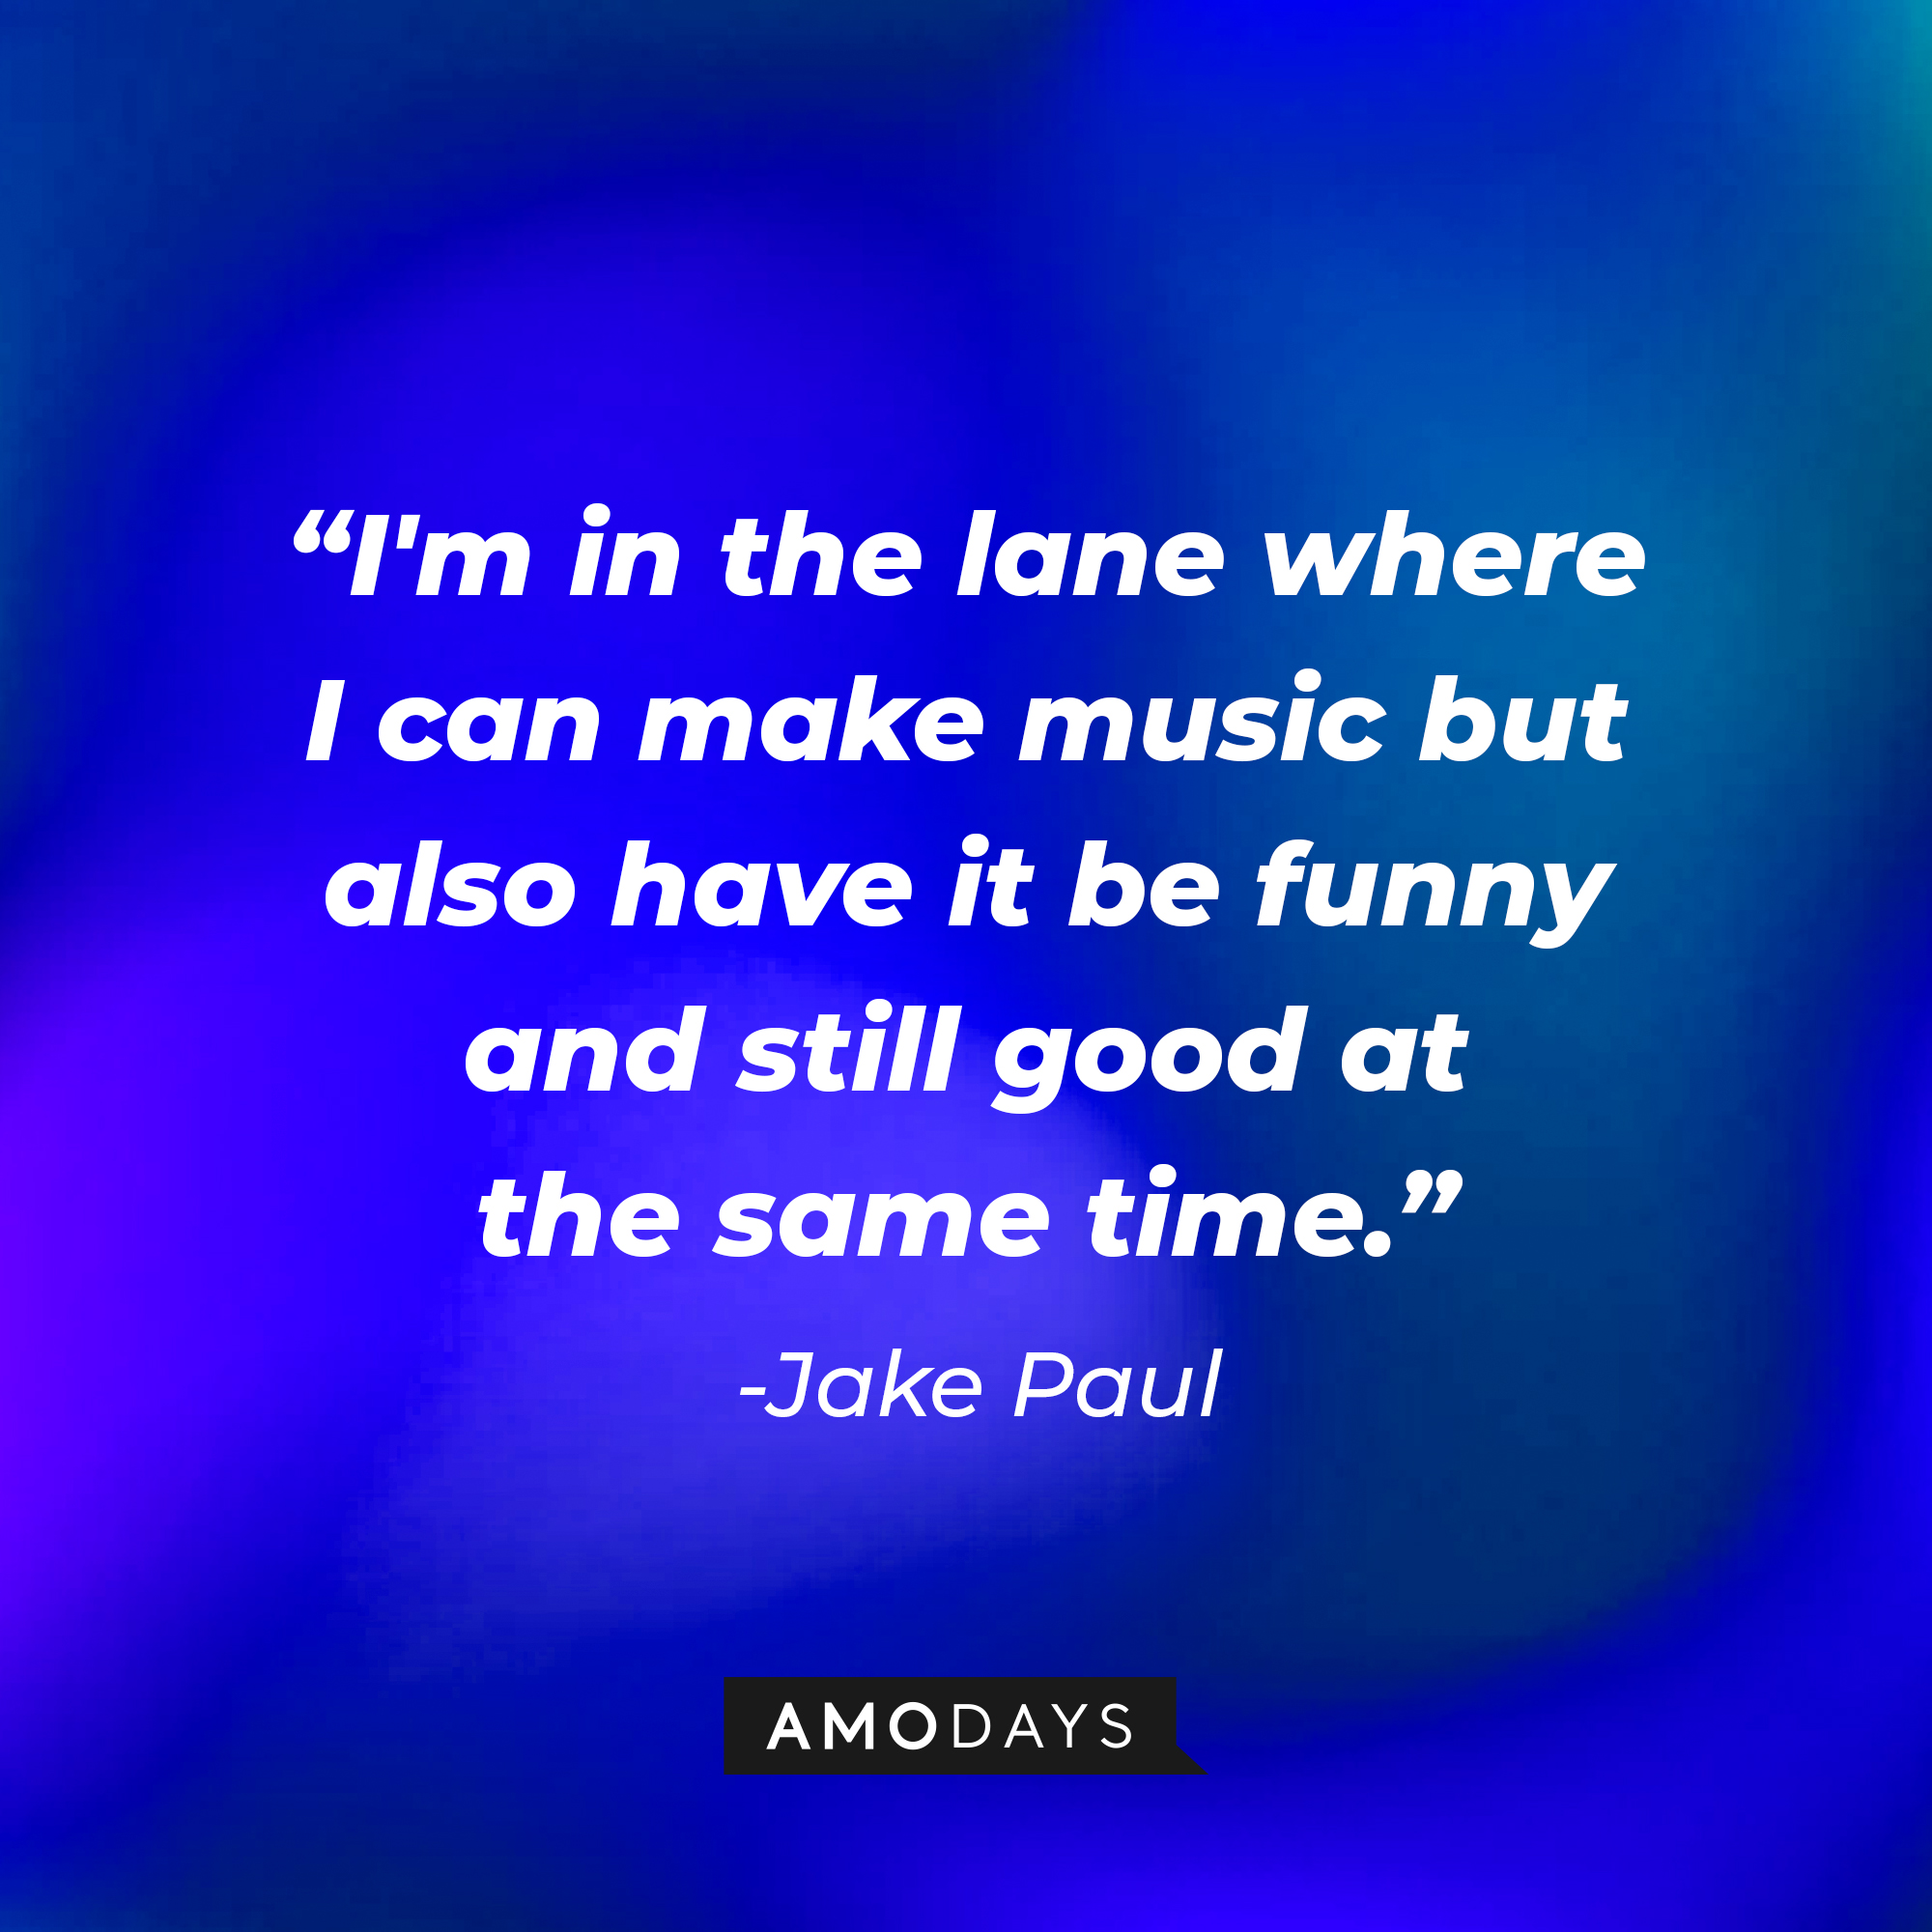 Jake Paul’s quote: “I'm in the lane where I can make music but also have it be funny and still good at the same time." | Image: Amodays